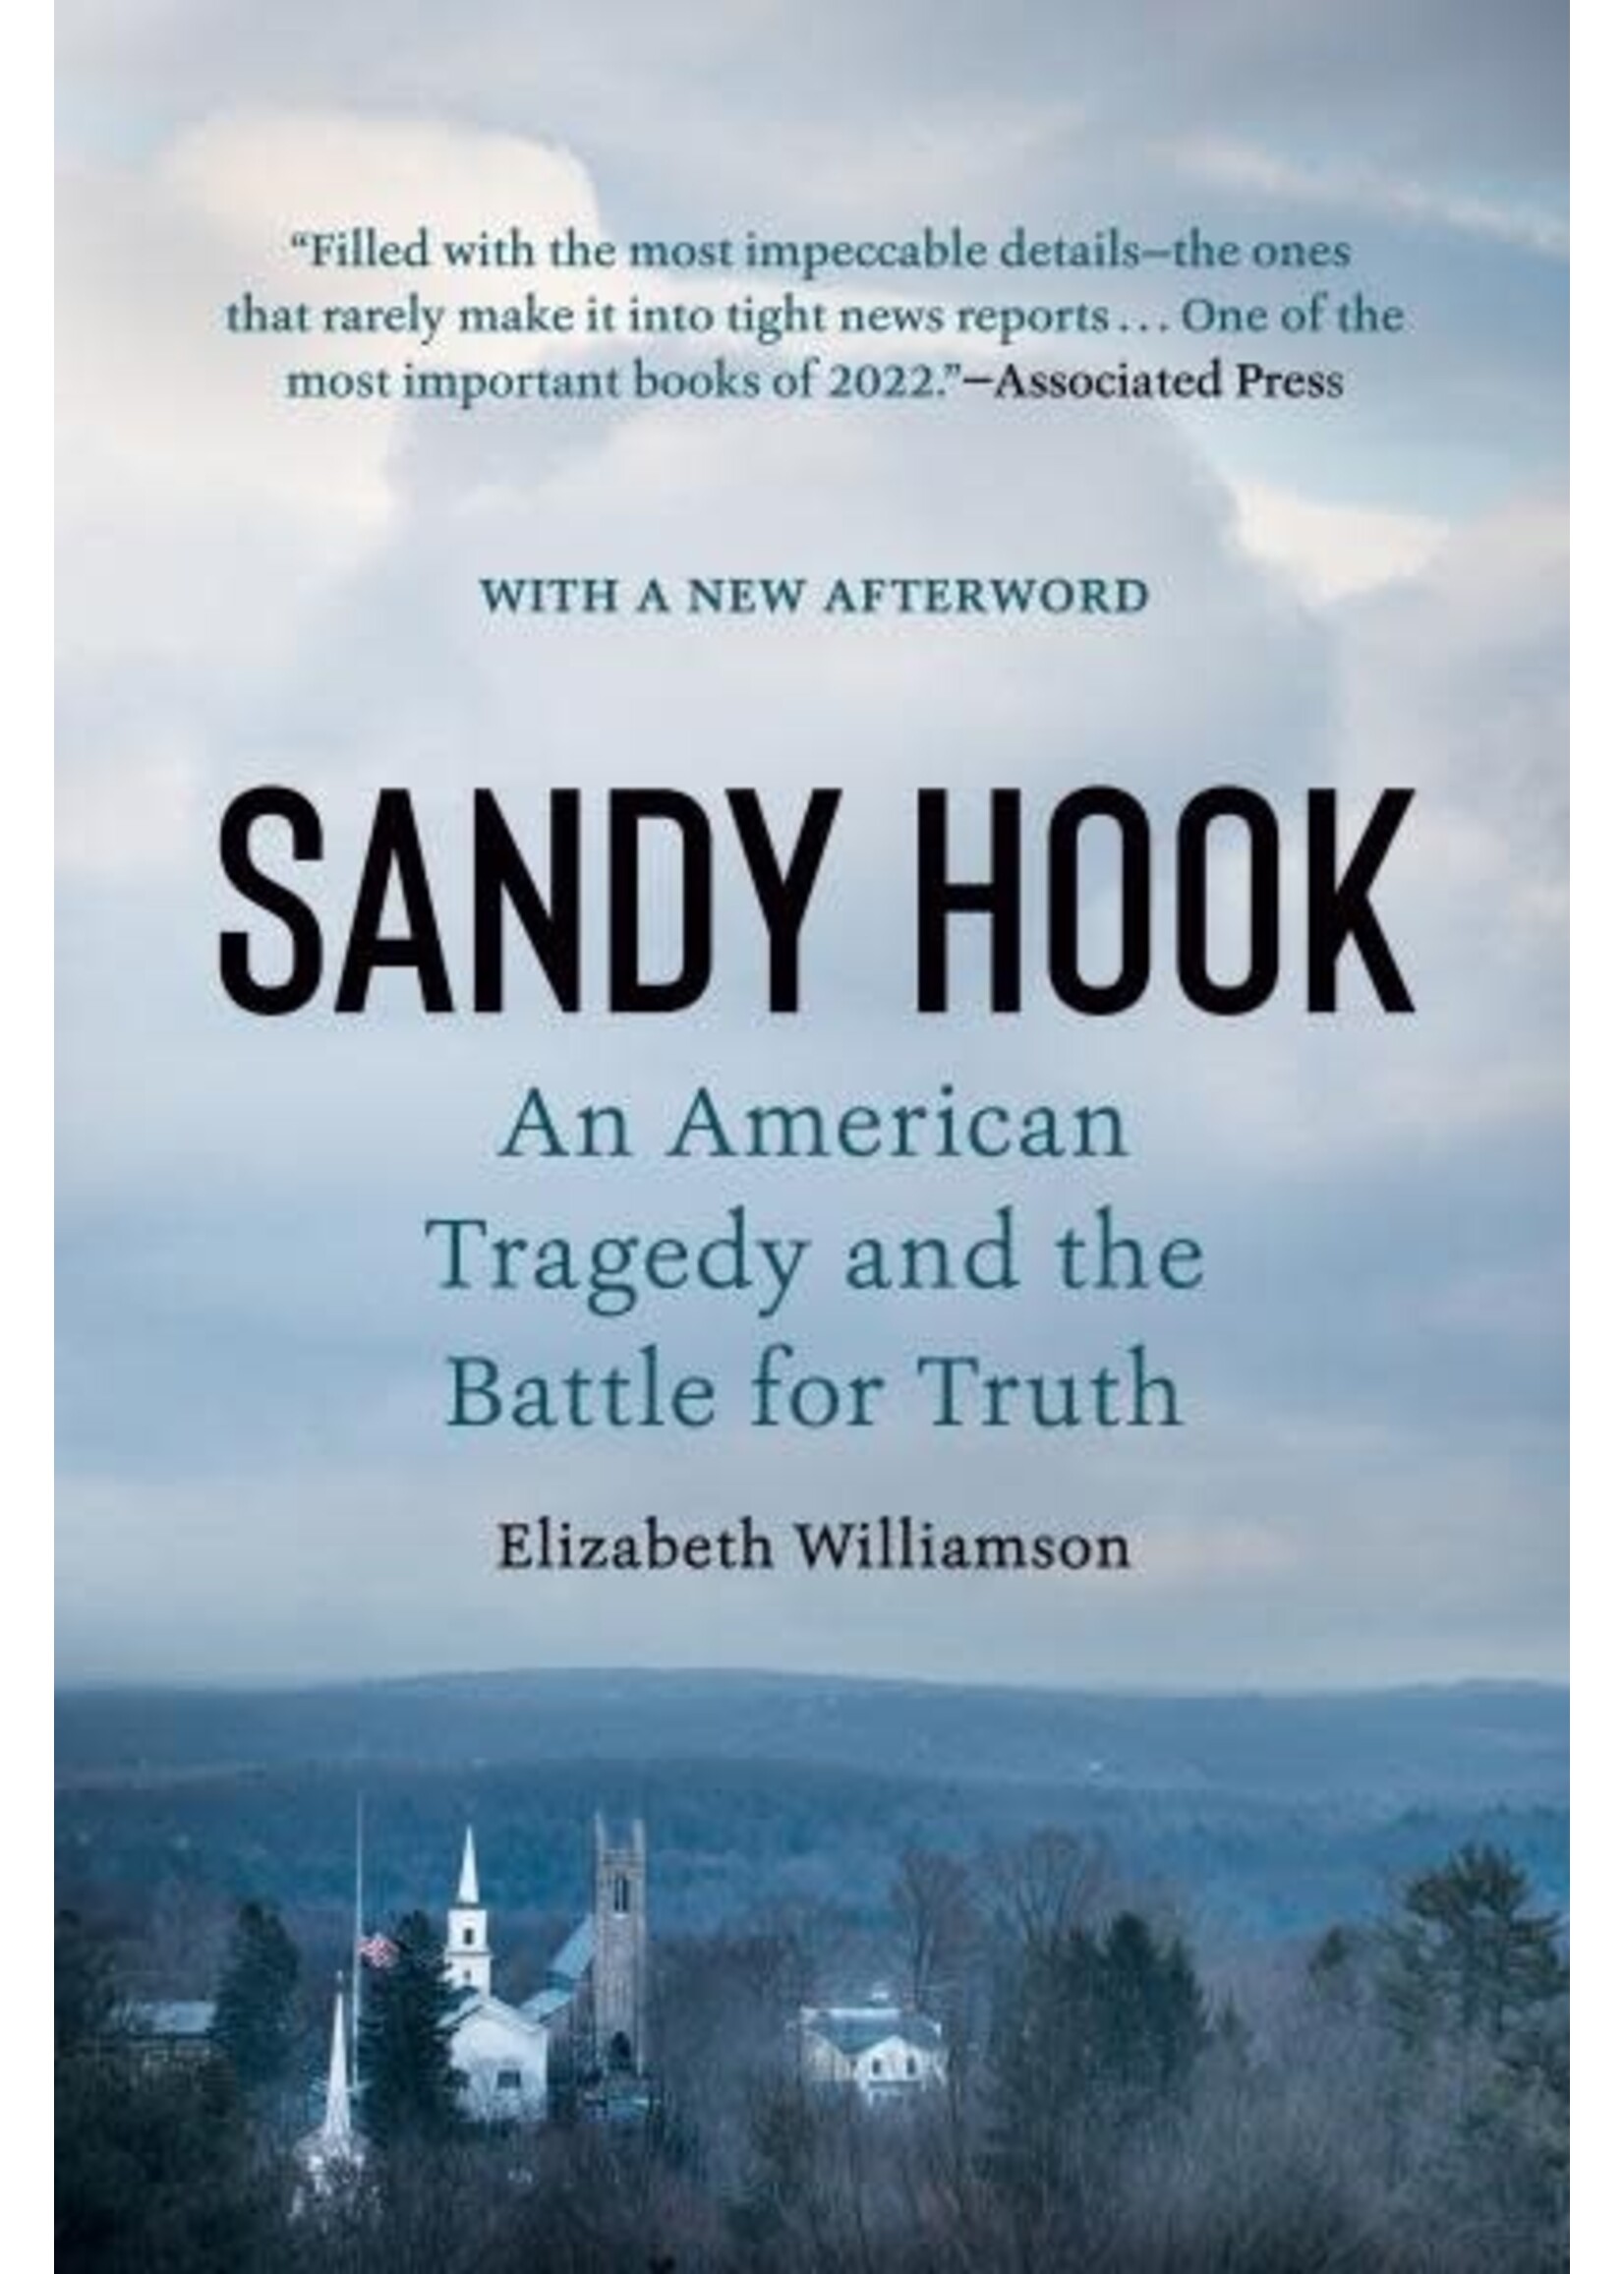 Sandy Hook: An American Tragedy and the Battle for Truth by Elizabeth Williamson